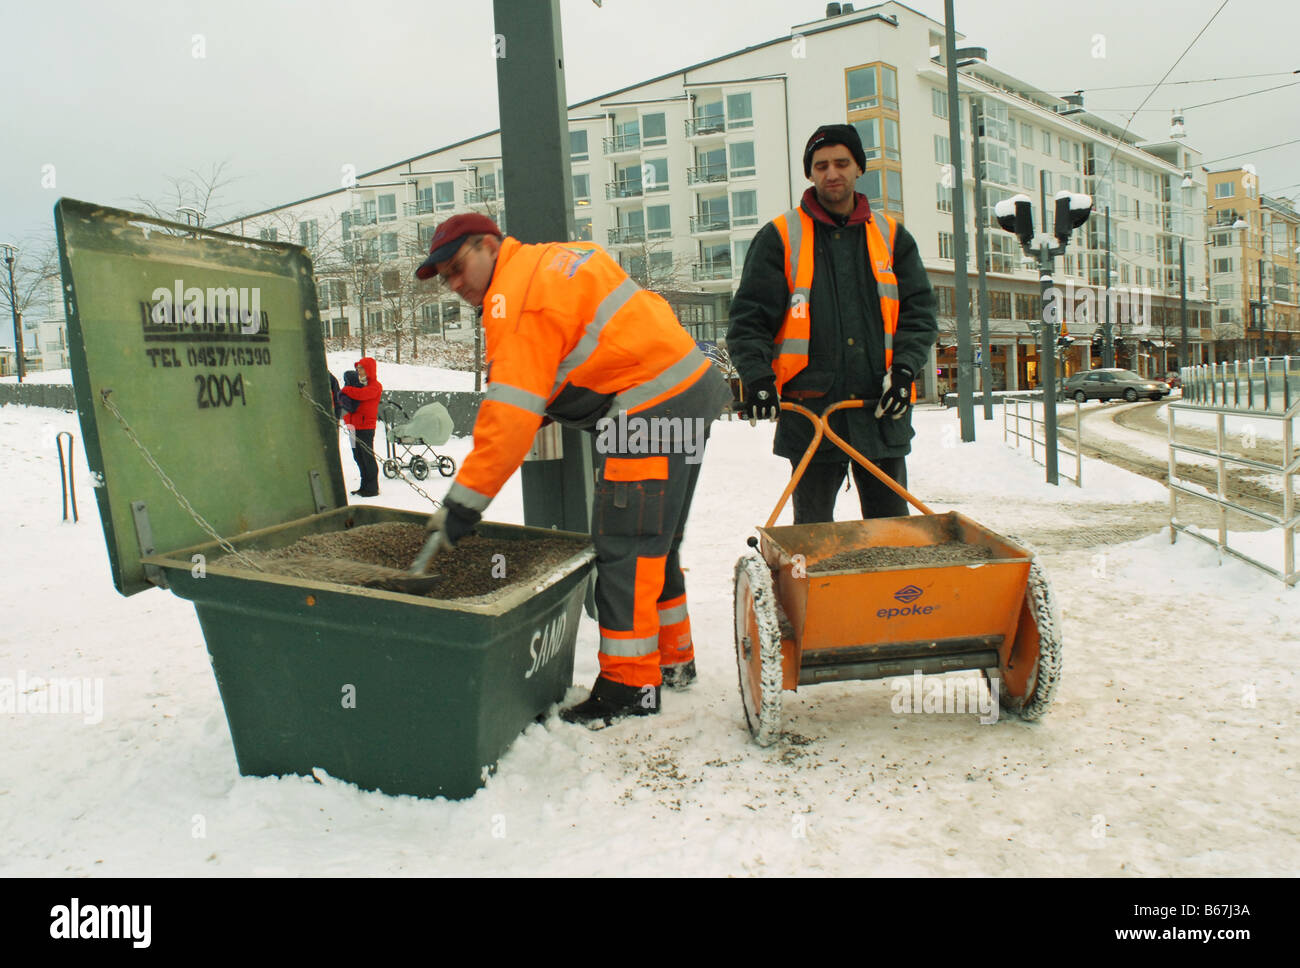 Workers gritting snow-covered streets in the Hammarby sjöstad district of Stockholm in Sweden Stock Photo